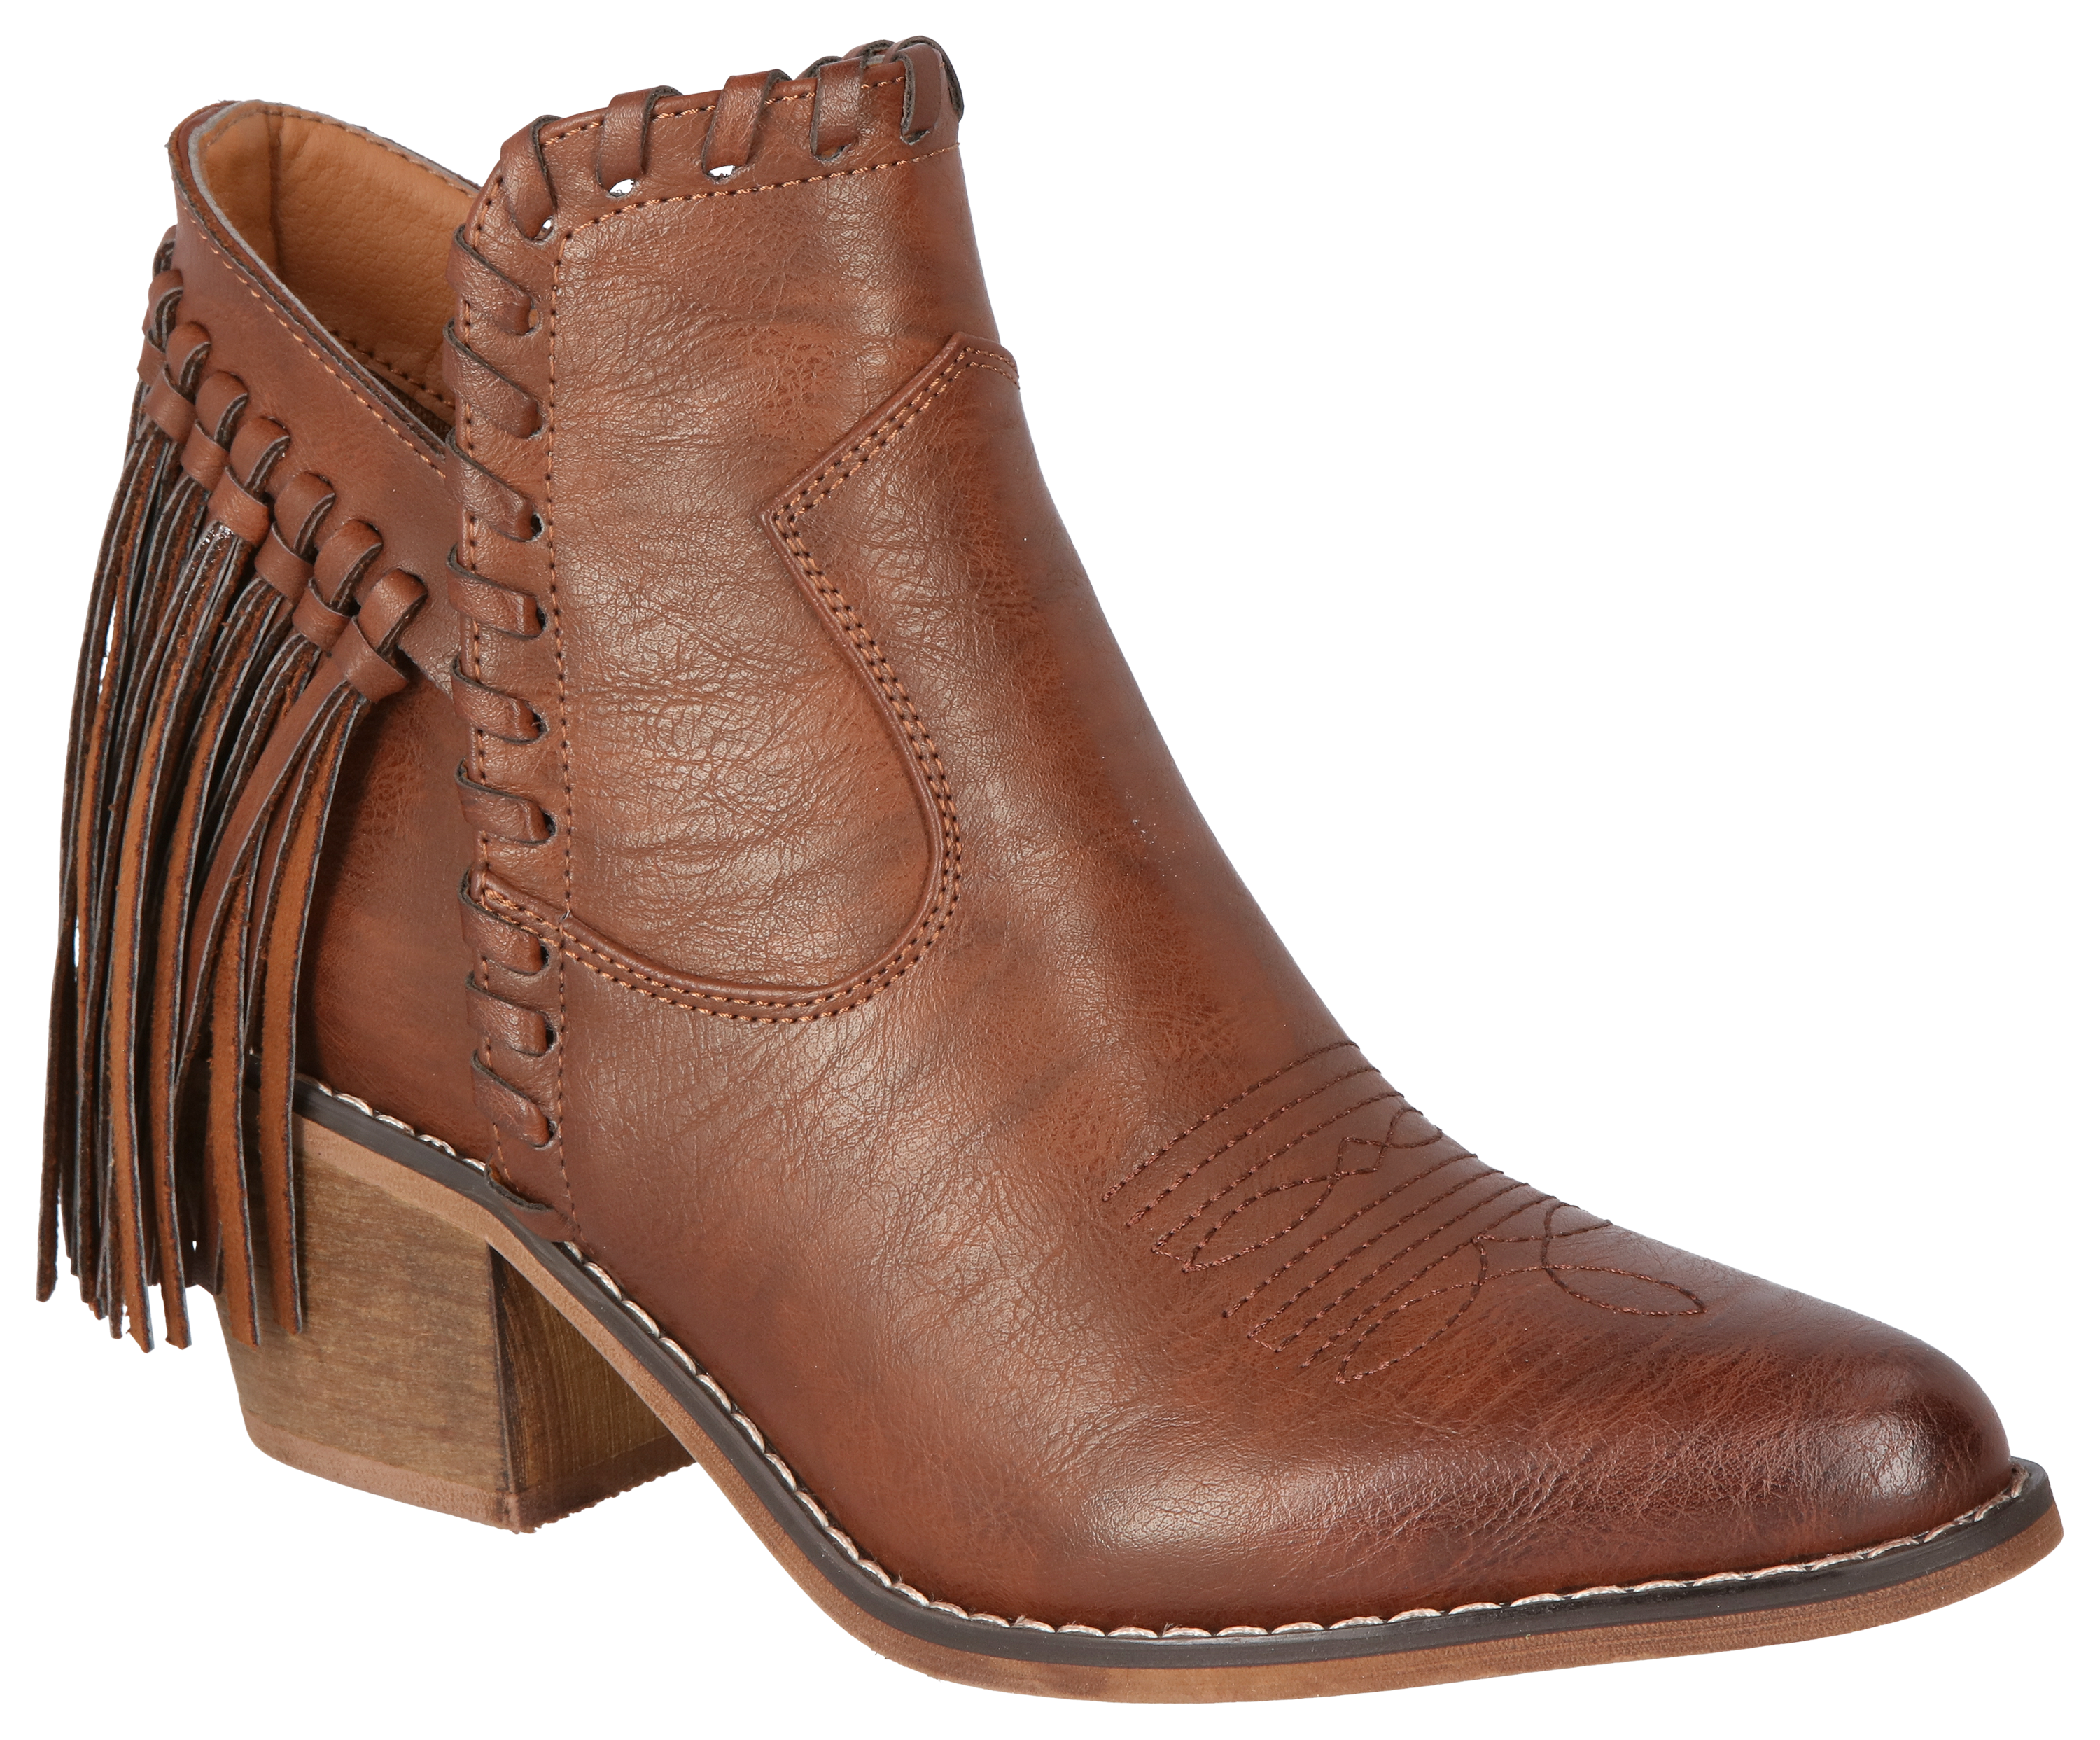 Natural Reflections Keykee Tassel Boots for Ladies - Whiskey - 11M